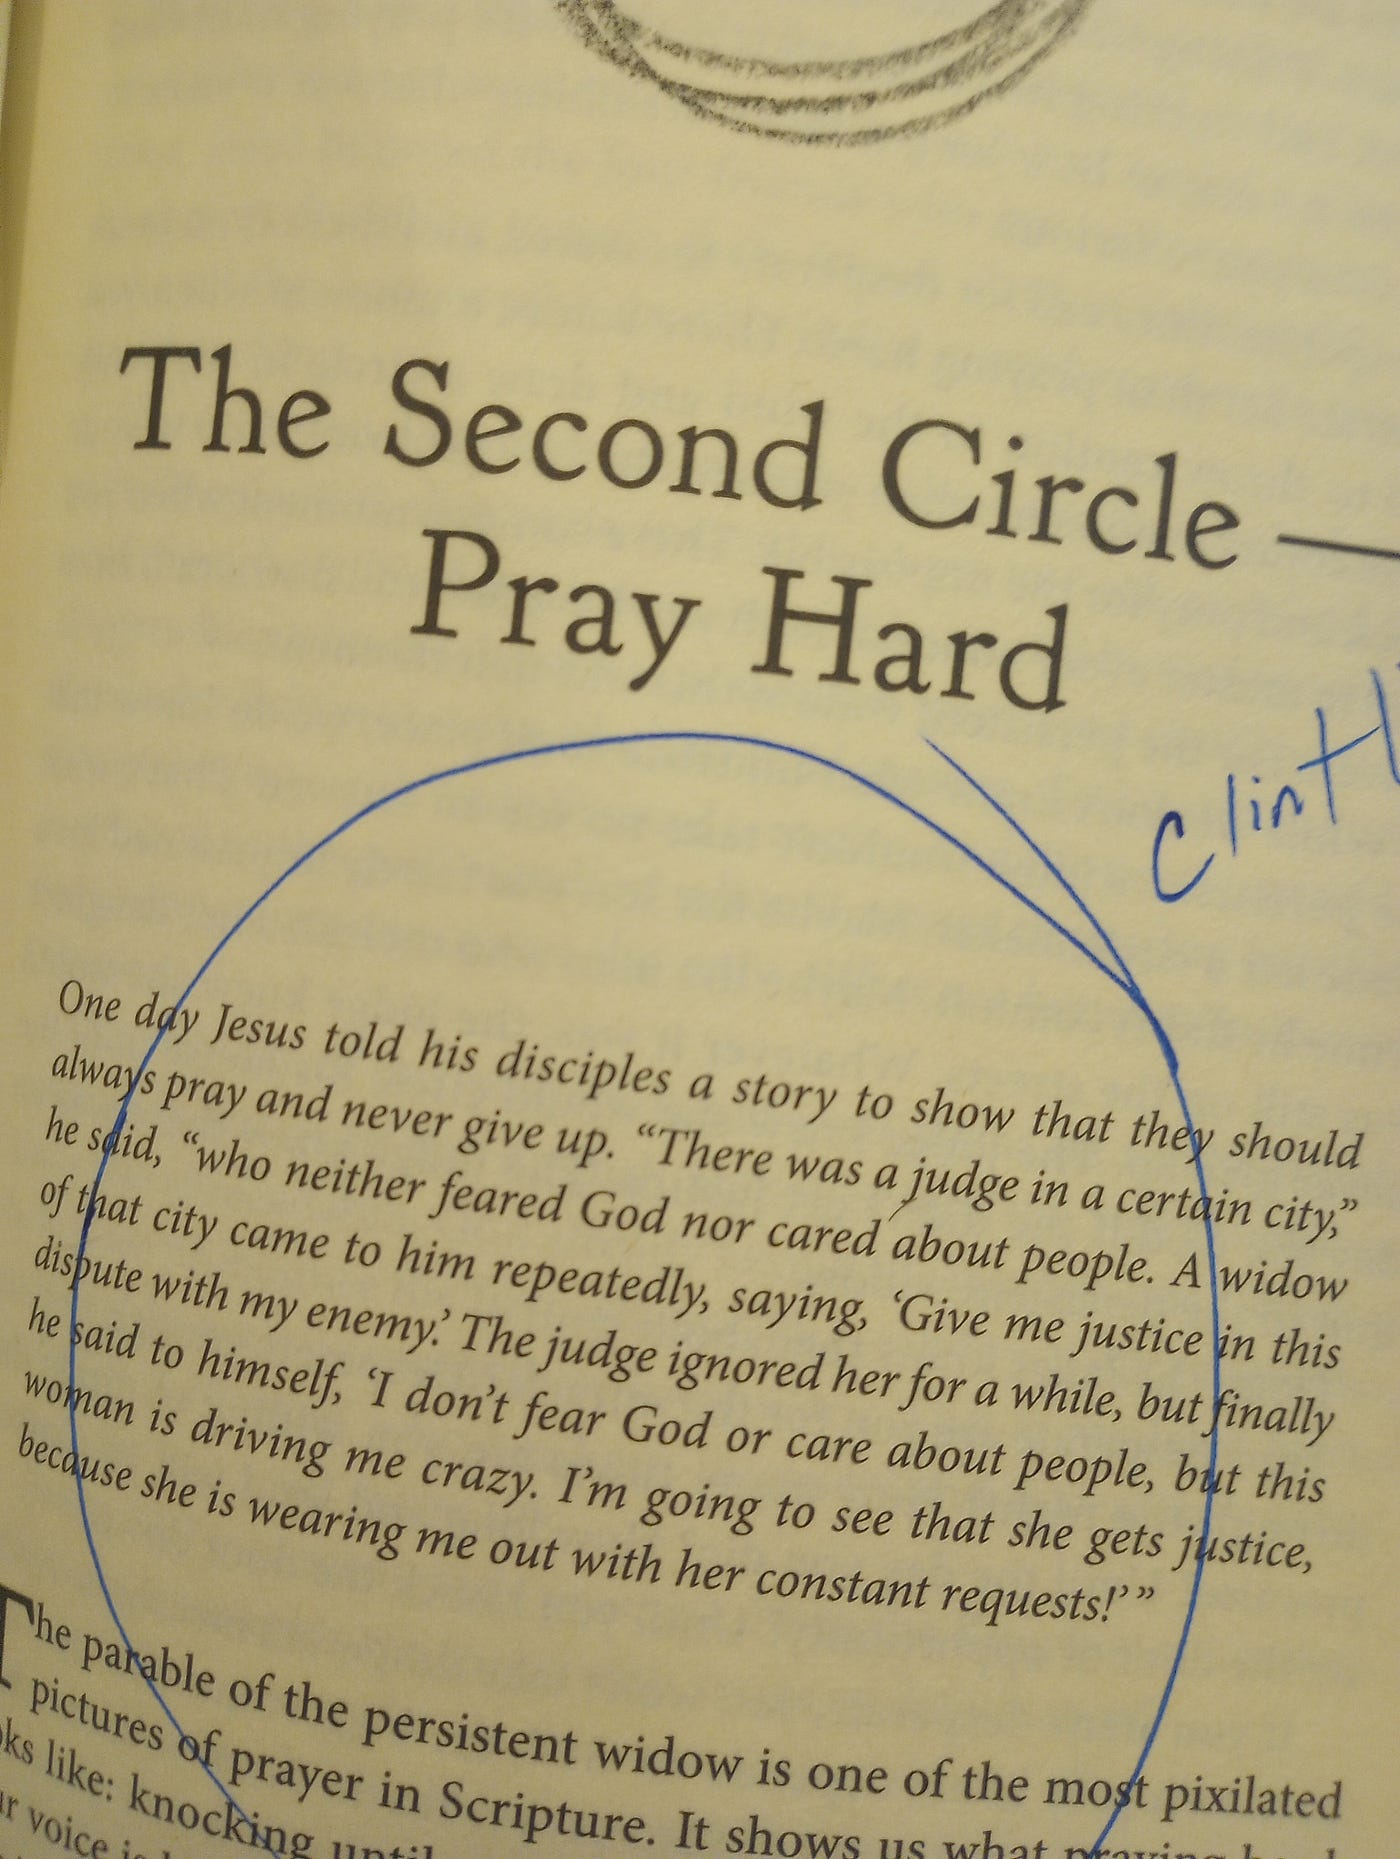 The Circle Maker: Praying Circles Around Your Biggest Dreams and Greatest  Fears See more